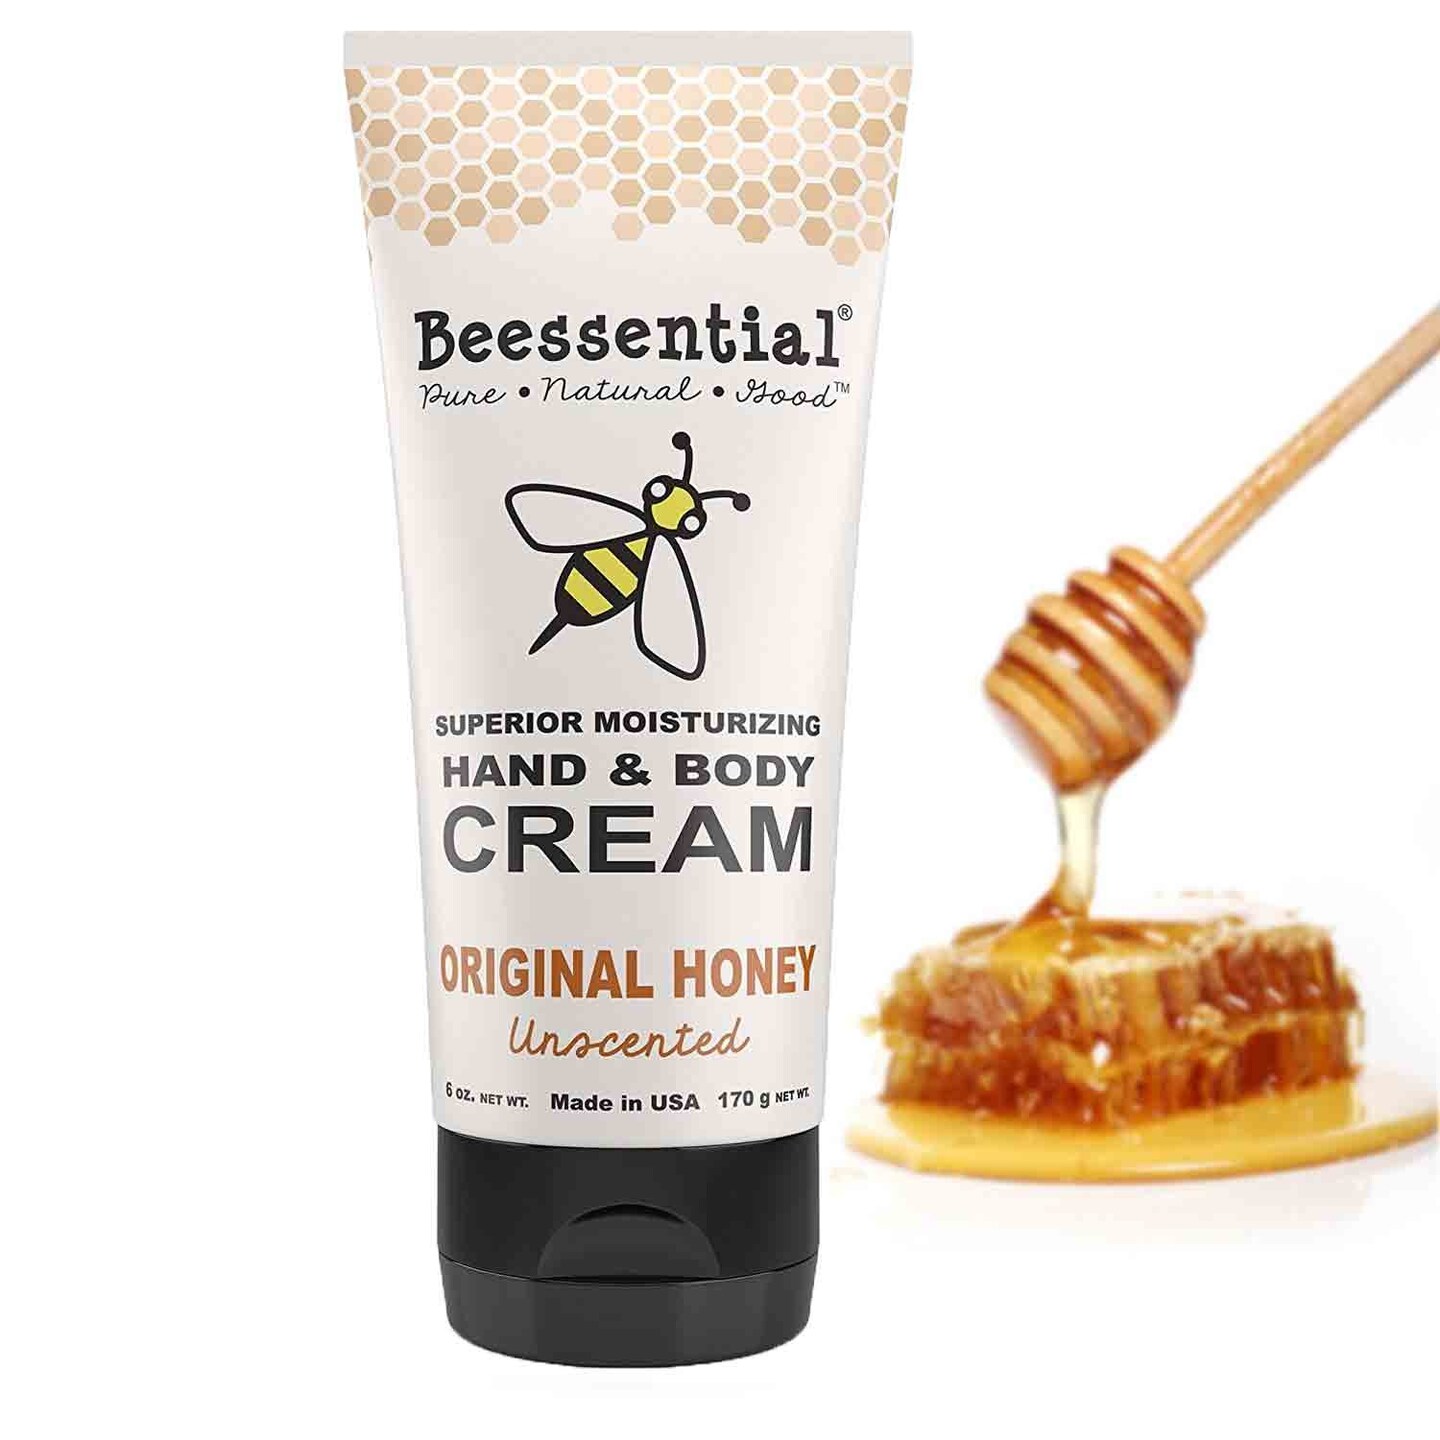 Beessential Natural Hand and Body Cream - Original Honey (Unscented)